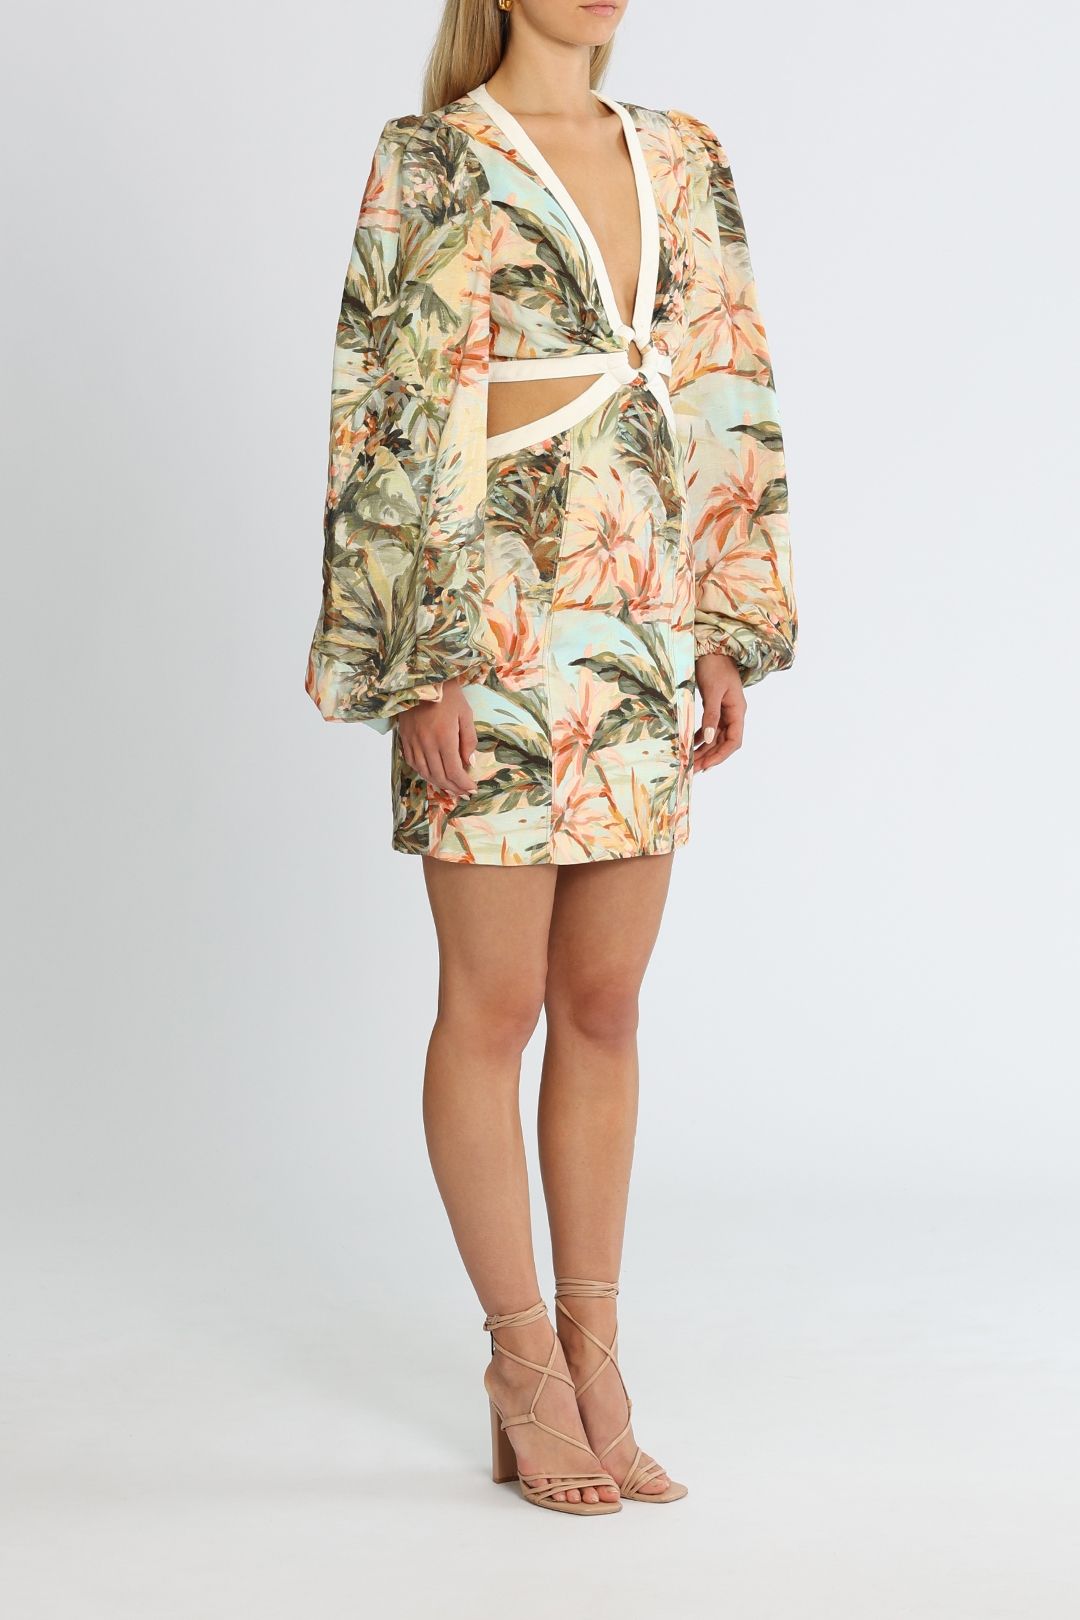 Significant Other Madrid Dress Painted Floral Print Cutout